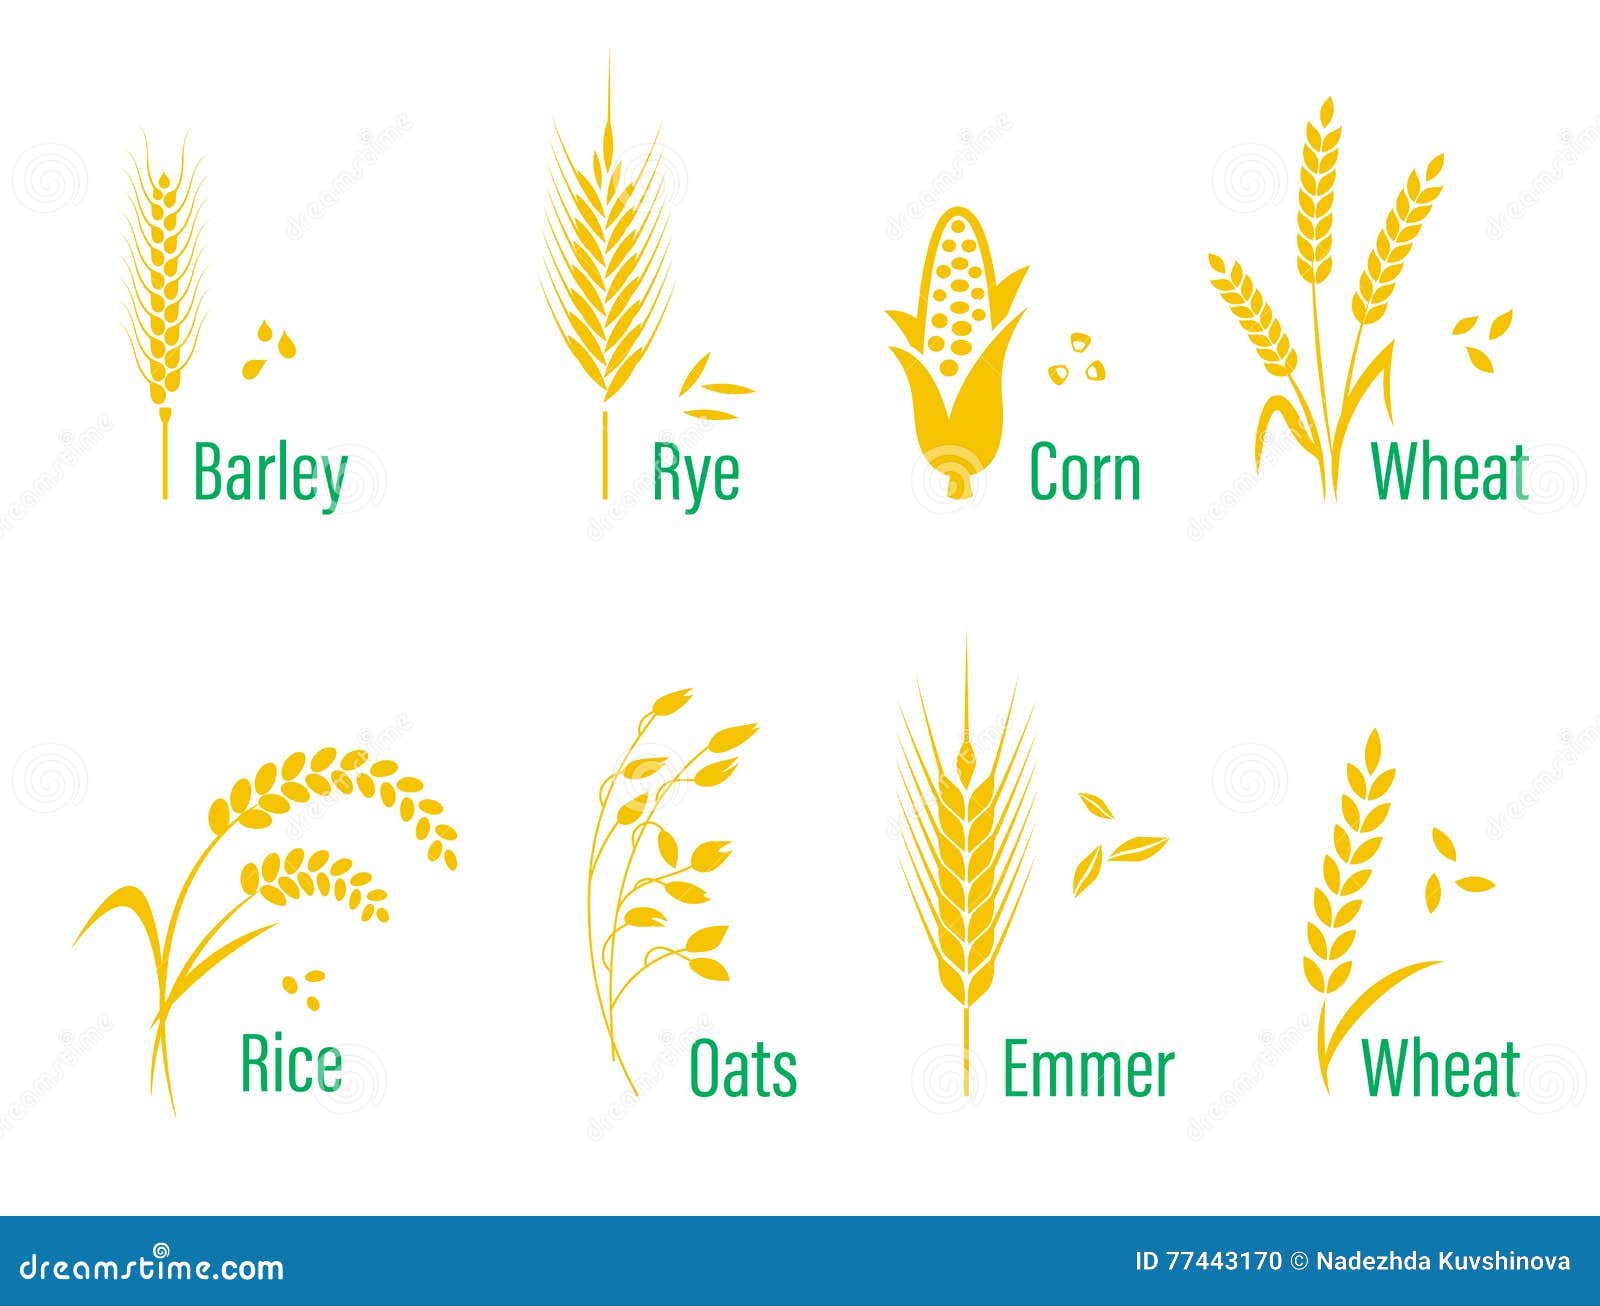 cereals icon set with rice, wheat, corn, oats, rye, barley.